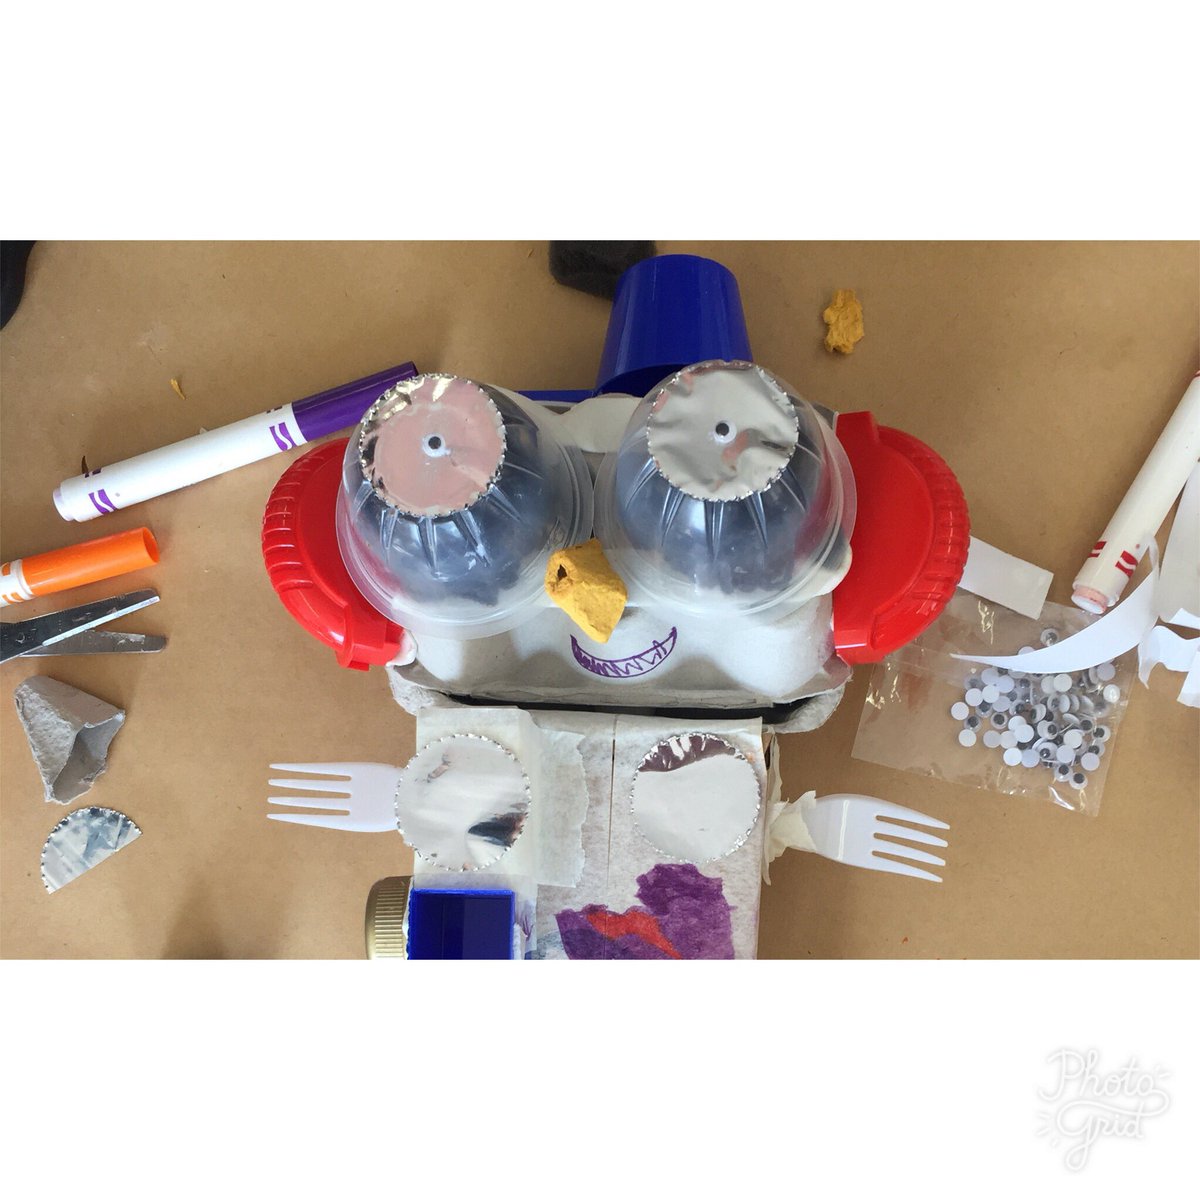 Scrap Tots @TorreAbbey tomorrow! 10-12 in the Learning Lab with the @SquircleArts team. 

MAKE, BUILD, CREATE with the @TroveScrapstore - Hands on scrappy workshops & activities for pre-school children (& their grown-ups).

£3 per child (£5 per family)

facebook.com/events/3546170…